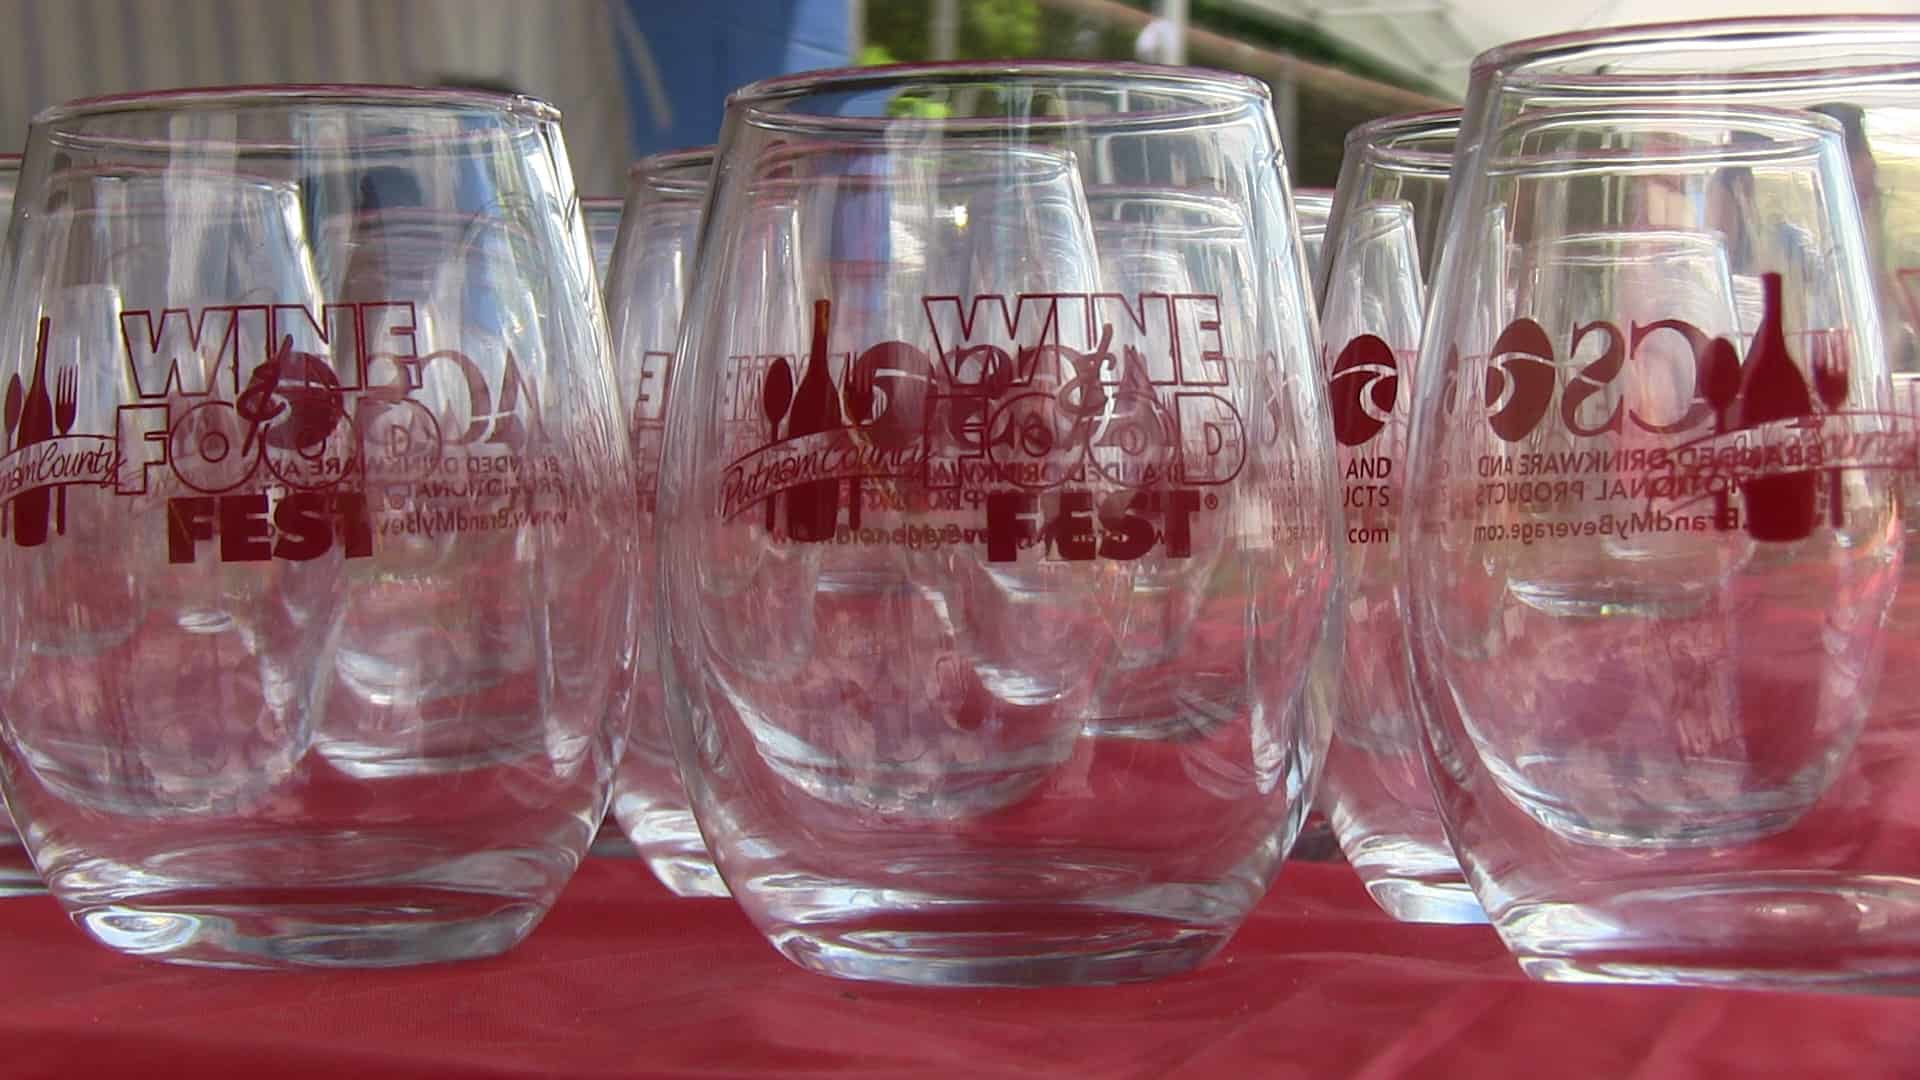 11th Annual Putnam County Wine & Food Fest to Be Held August 6th and 7th